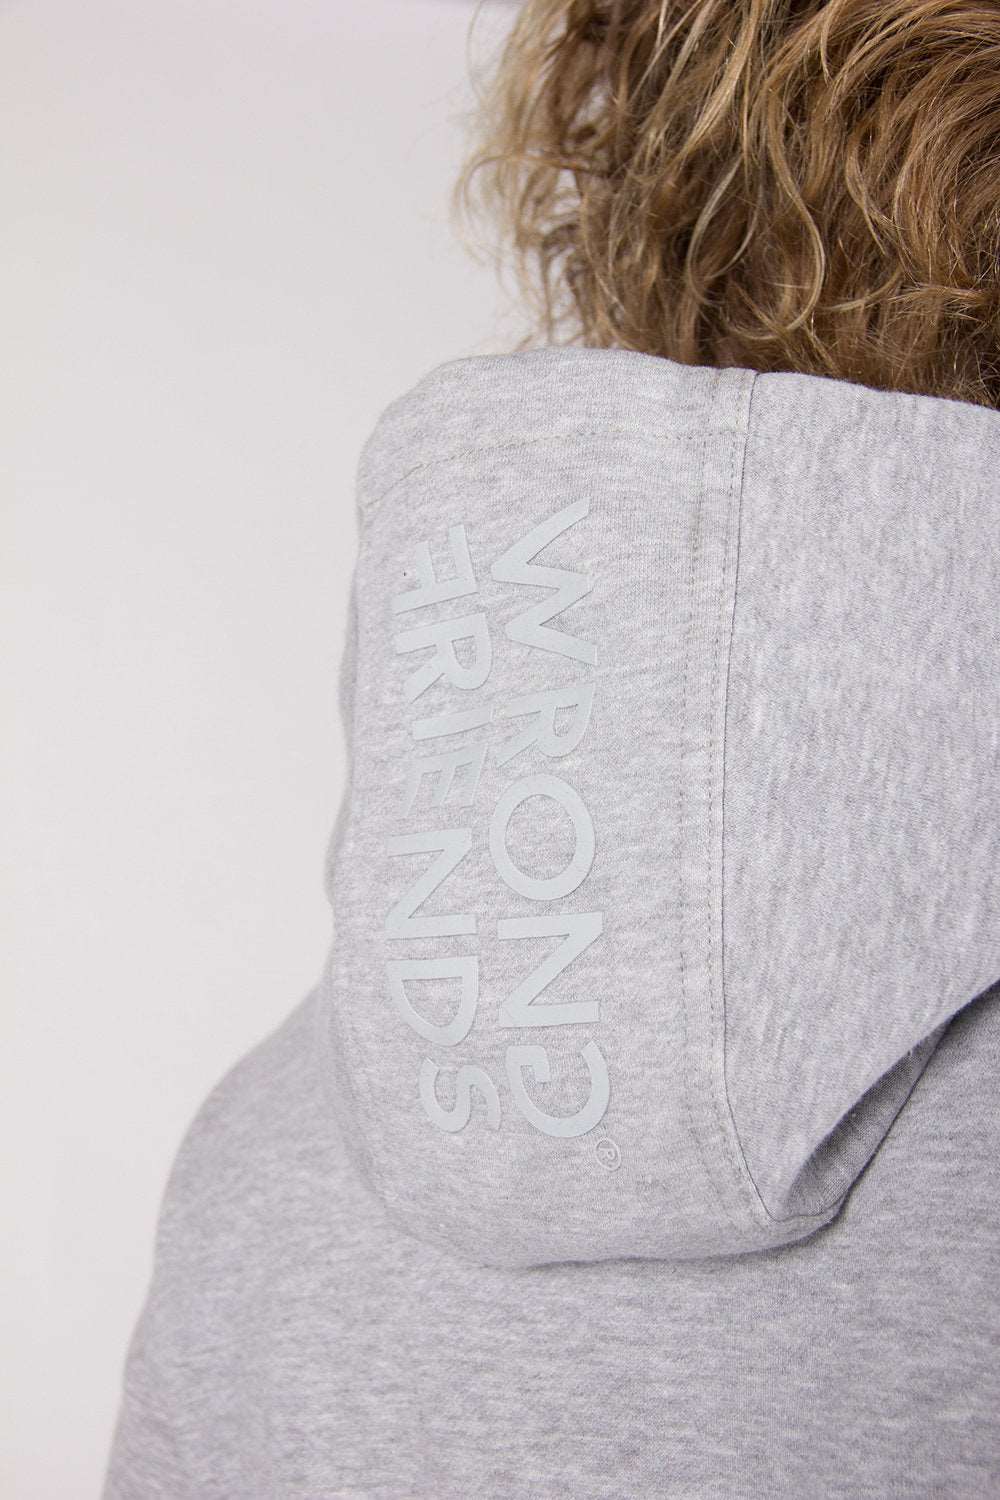 MOSCOW HOODIE GRAY/BLACK